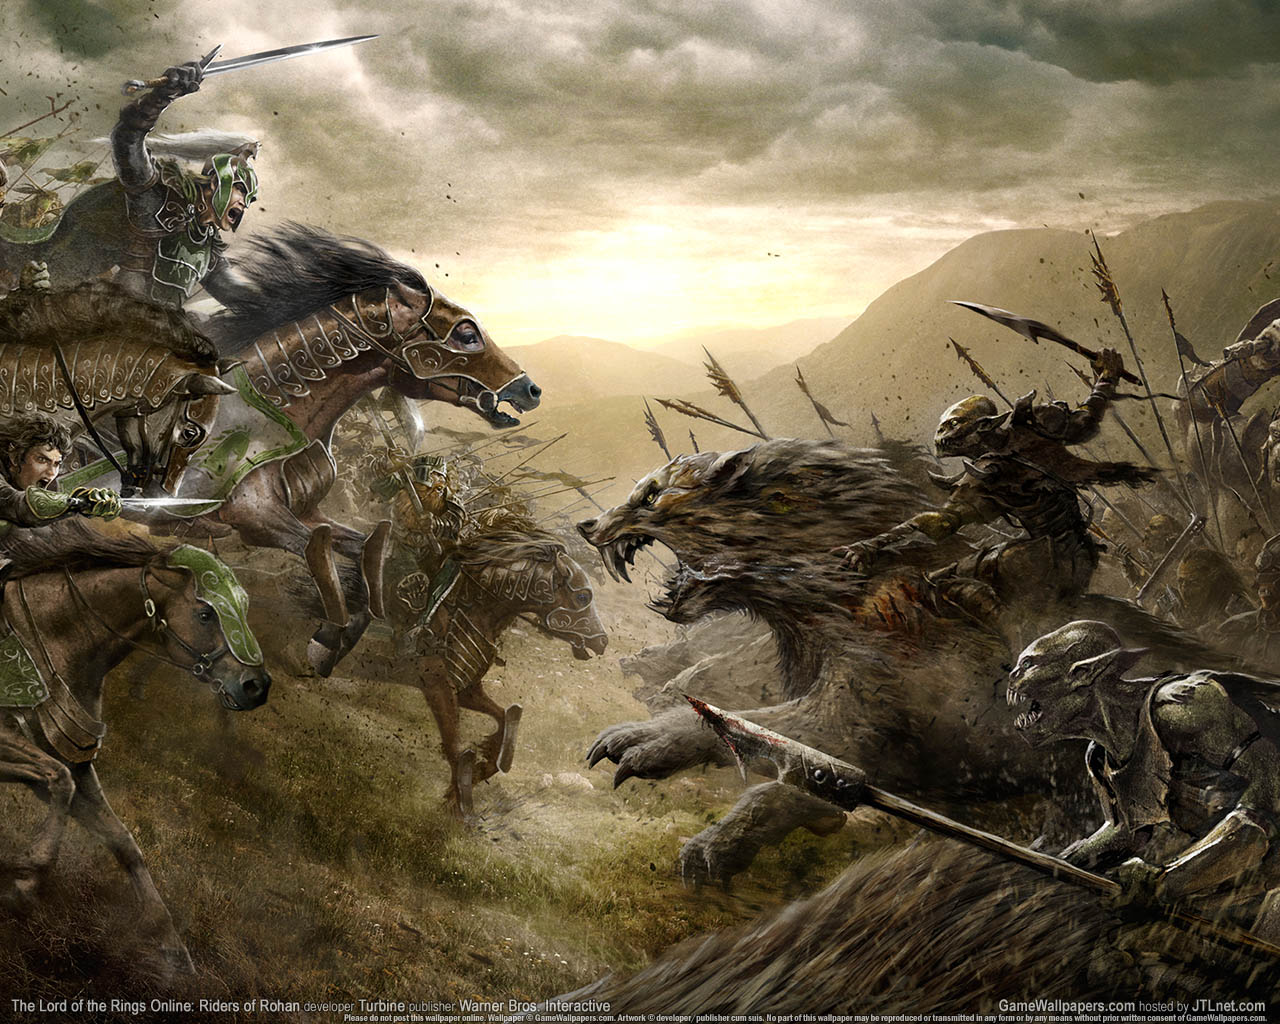 The Lord of the Rings Online%3A Riders of Rohan achtergrond 01 1280x1024